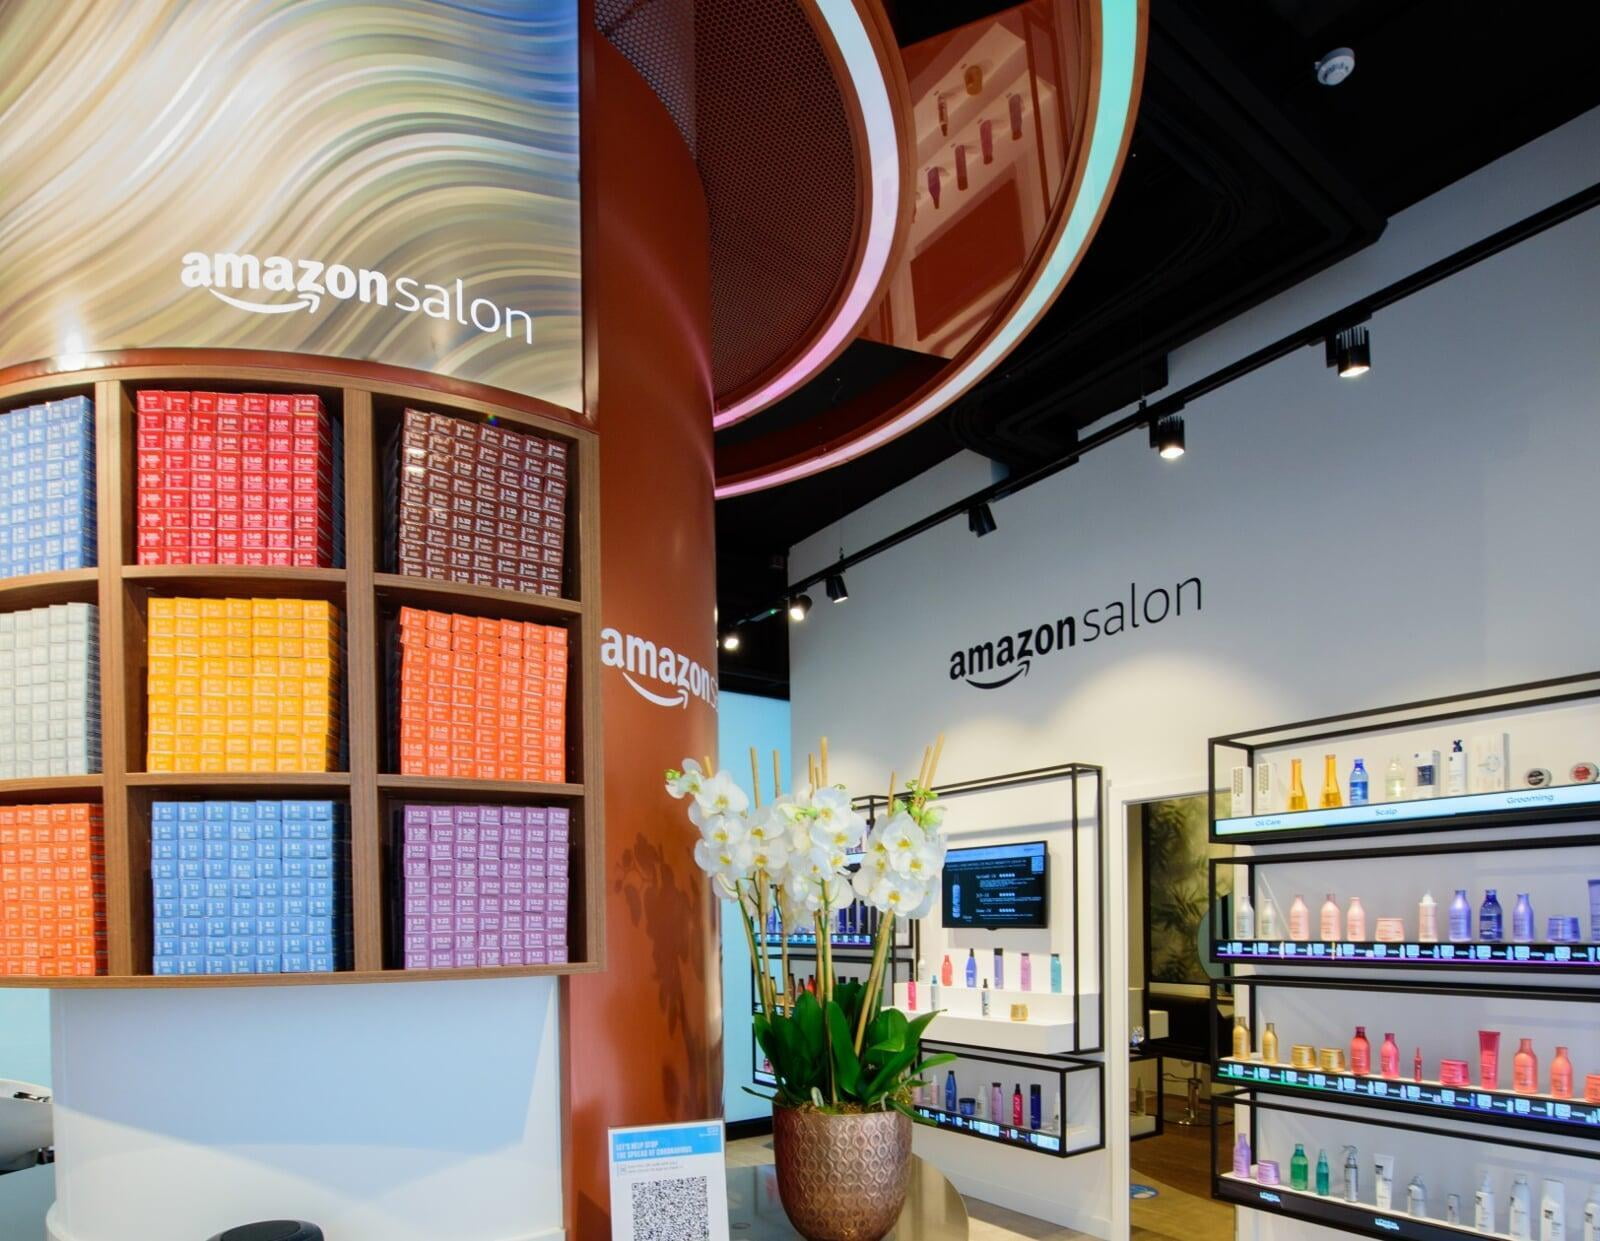 Amazon Now Has a Salon - How Will It Impact The Beauty Industry?